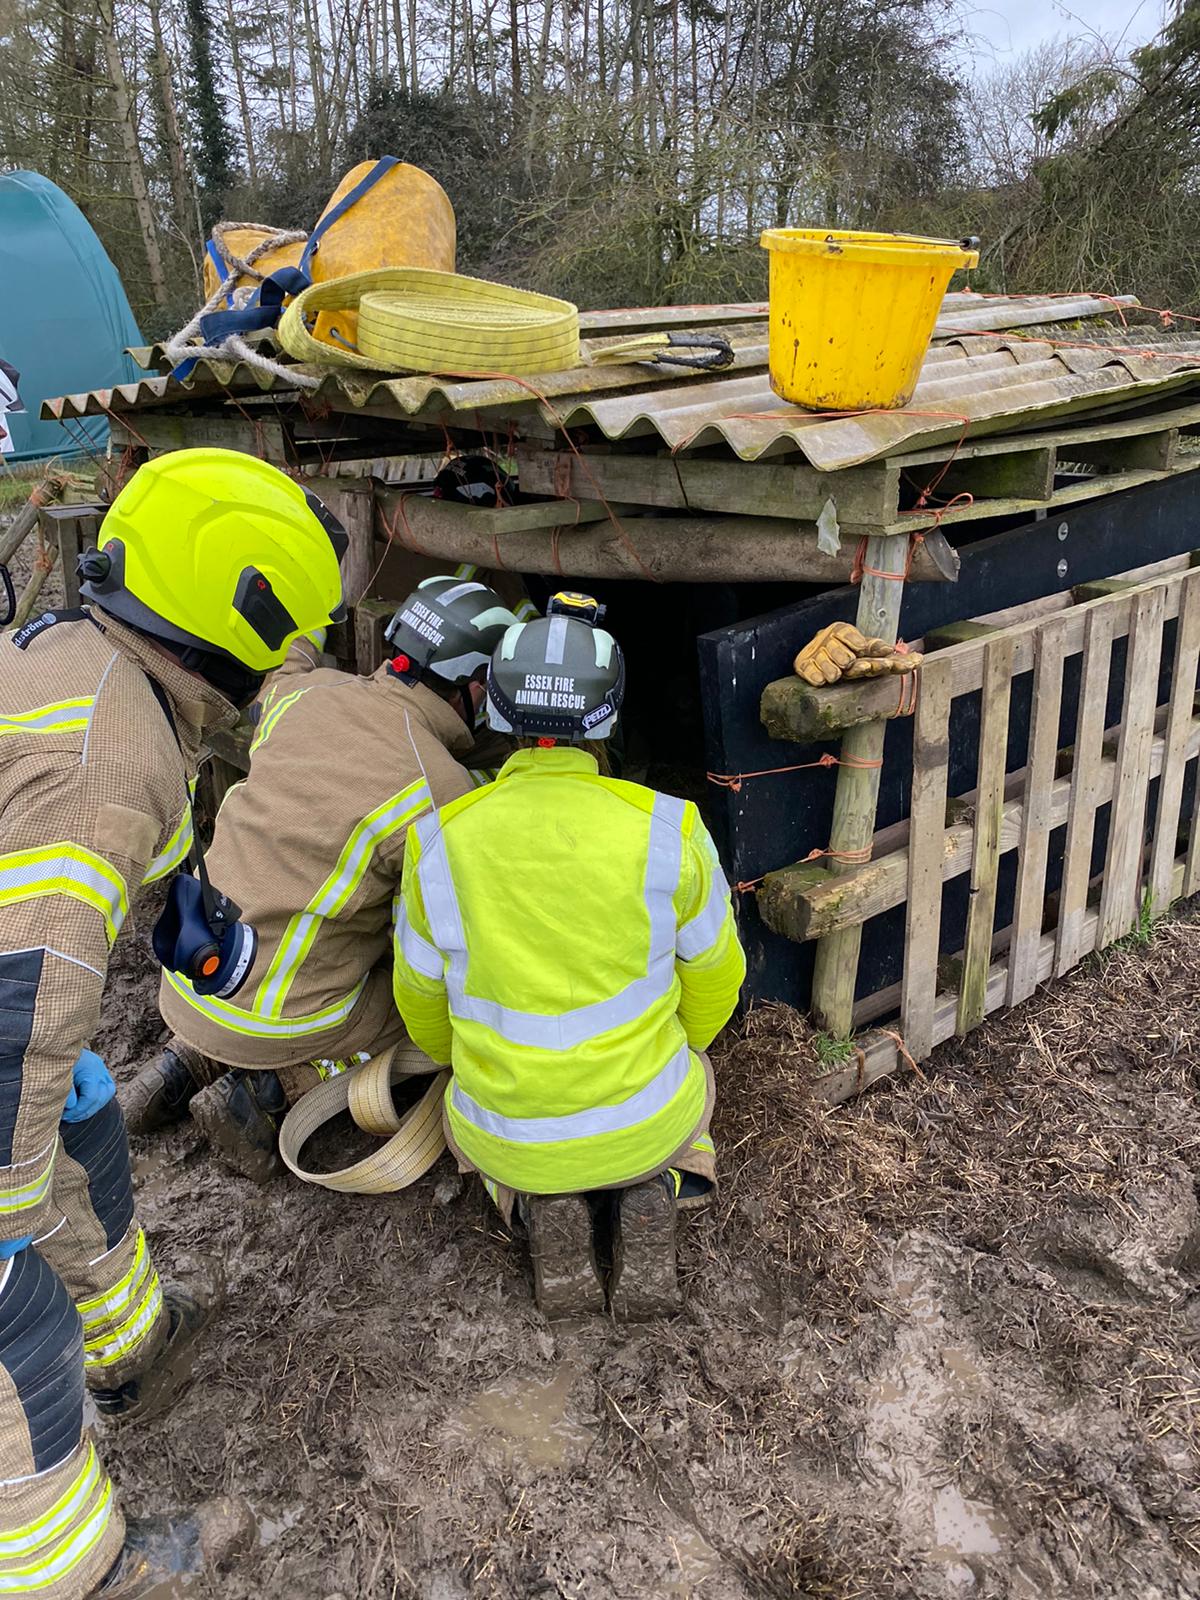 Dolly went for a lie down in her sty and got stuck in the mud. (Essex County Fire and Rescue Service/ PA)